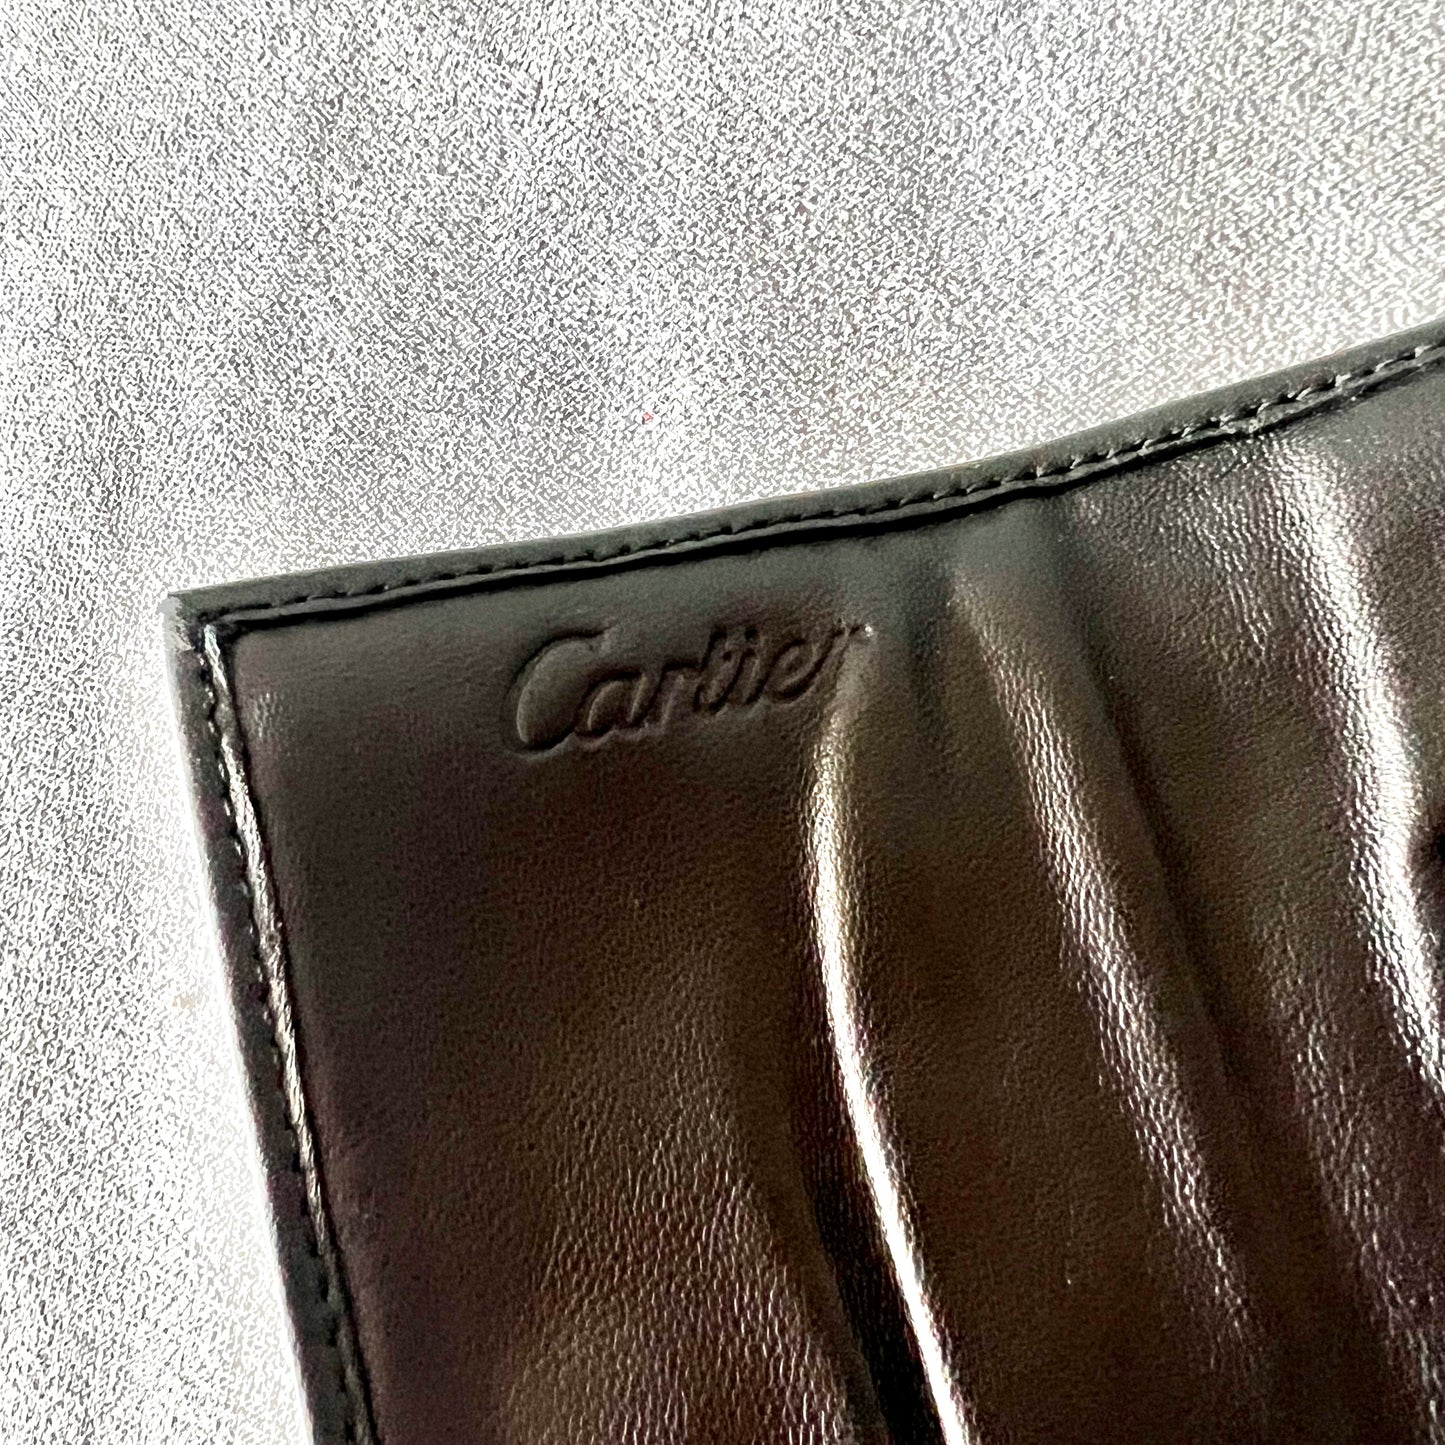 CARTIER Roadster Accessories Black Leather Pouch 5.60x3 inches